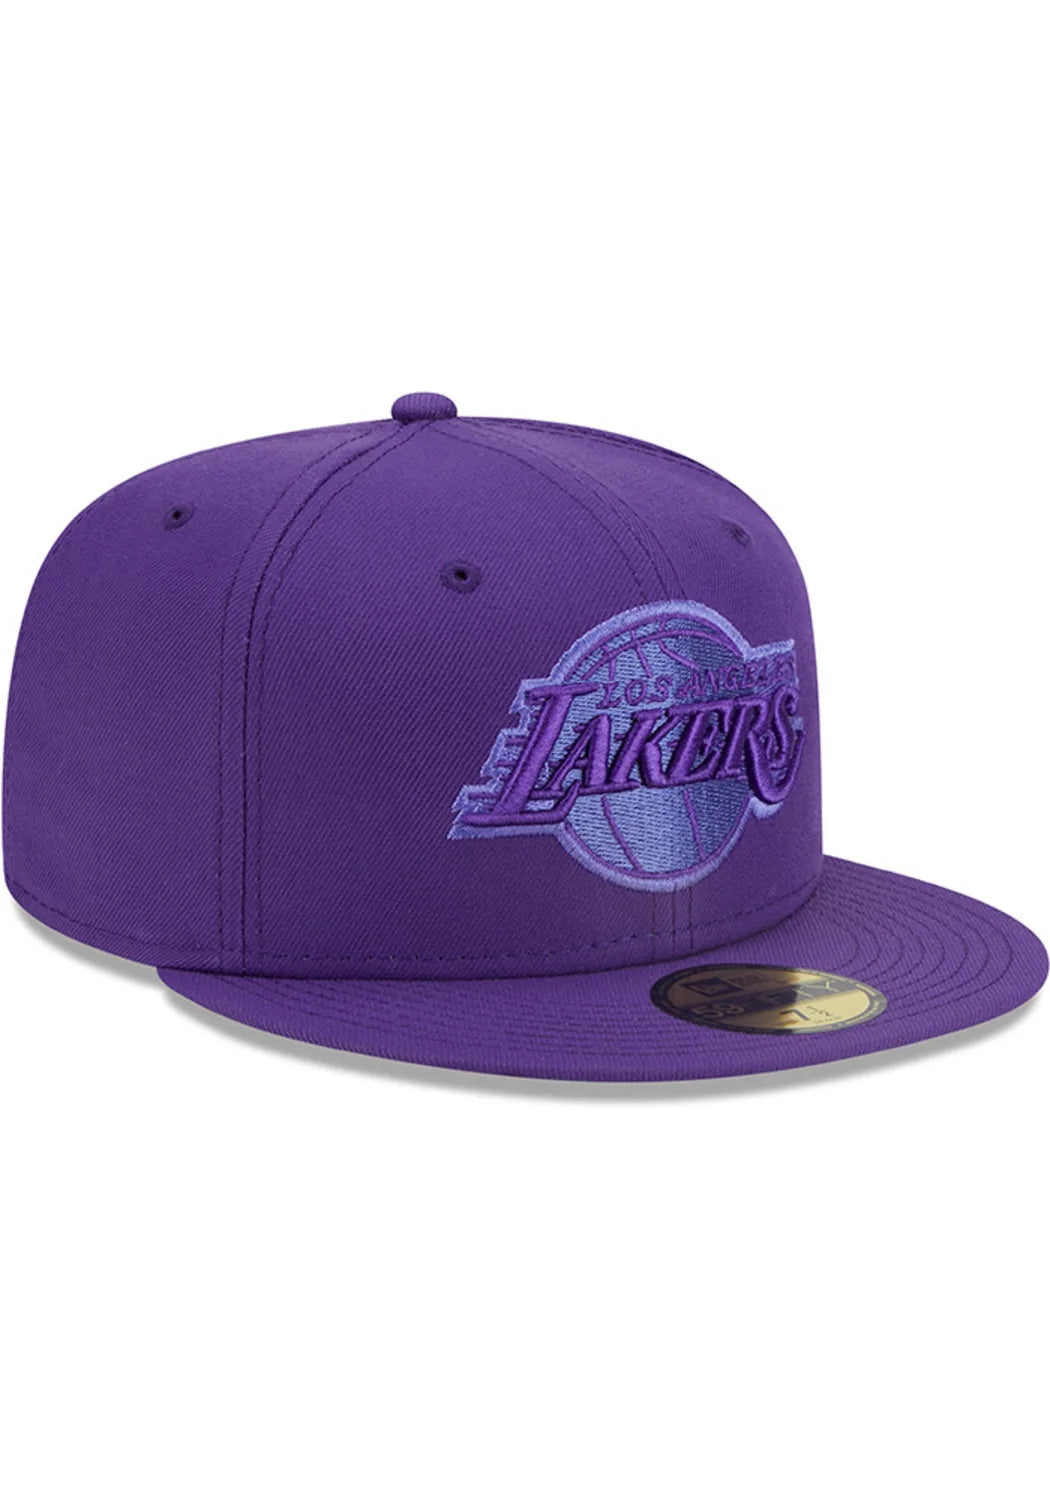 New Era - Los Angeles Lakers Purple Monocamo Fitted Hat